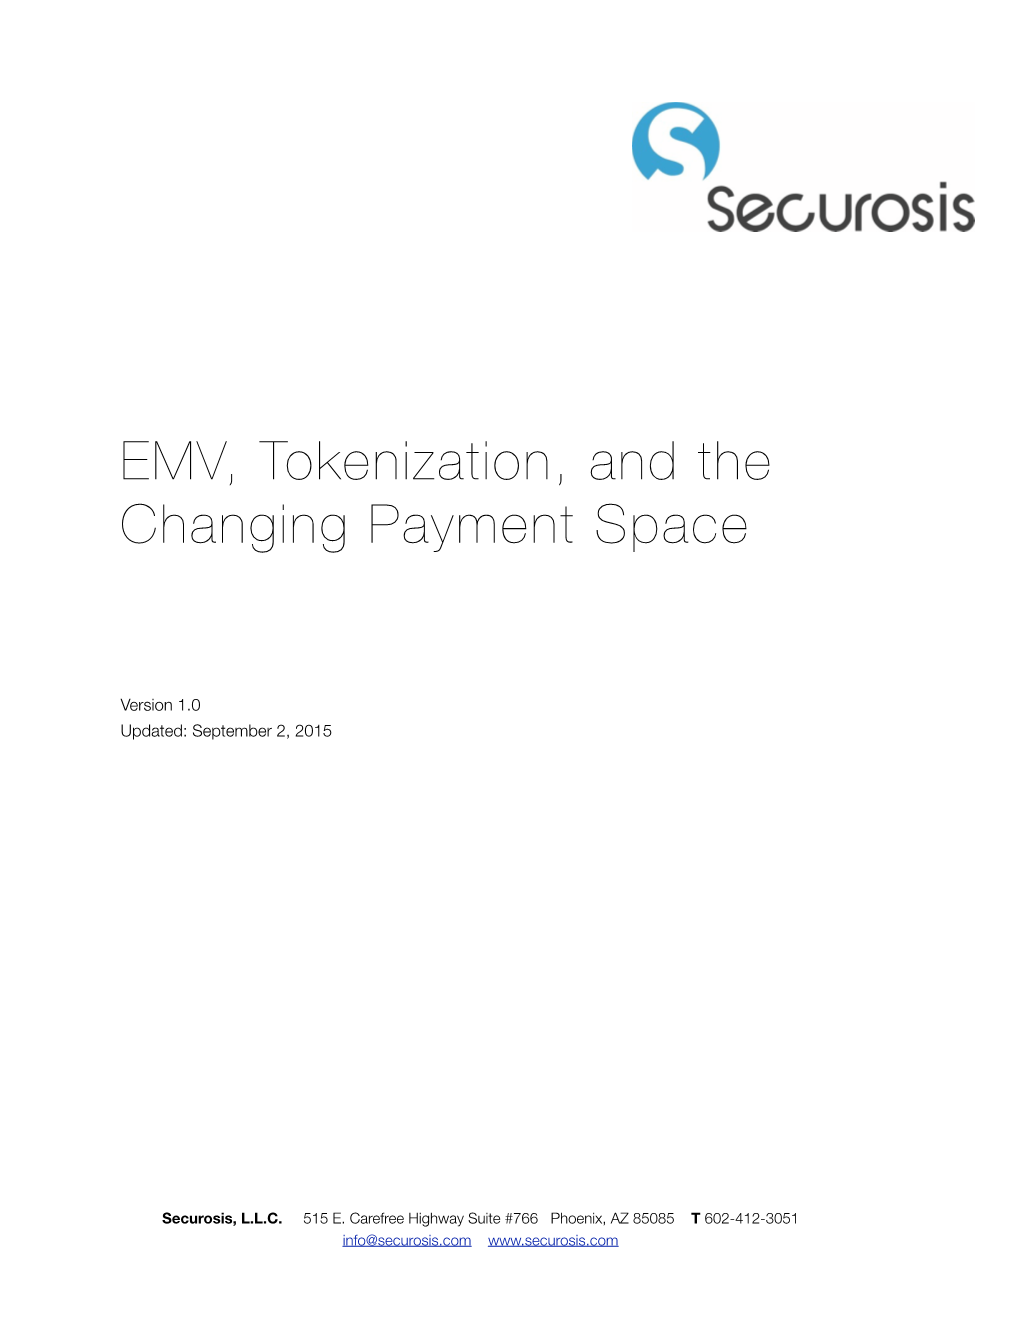 EMV, Tokenization, and the Changing Payment Space